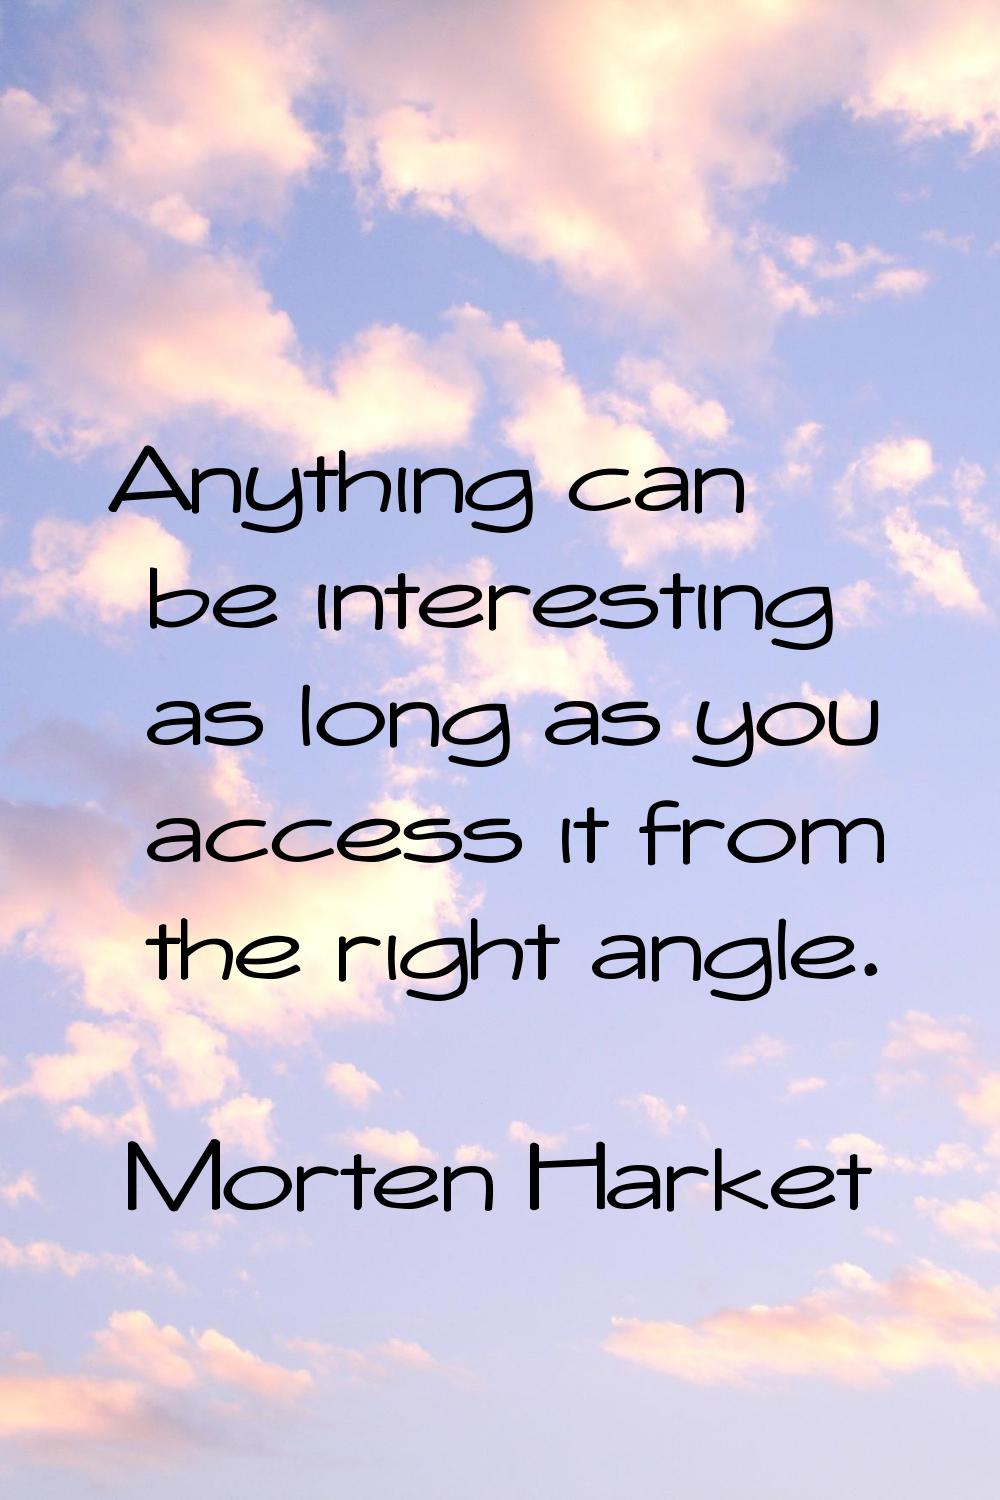 Anything can be interesting as long as you access it from the right angle.